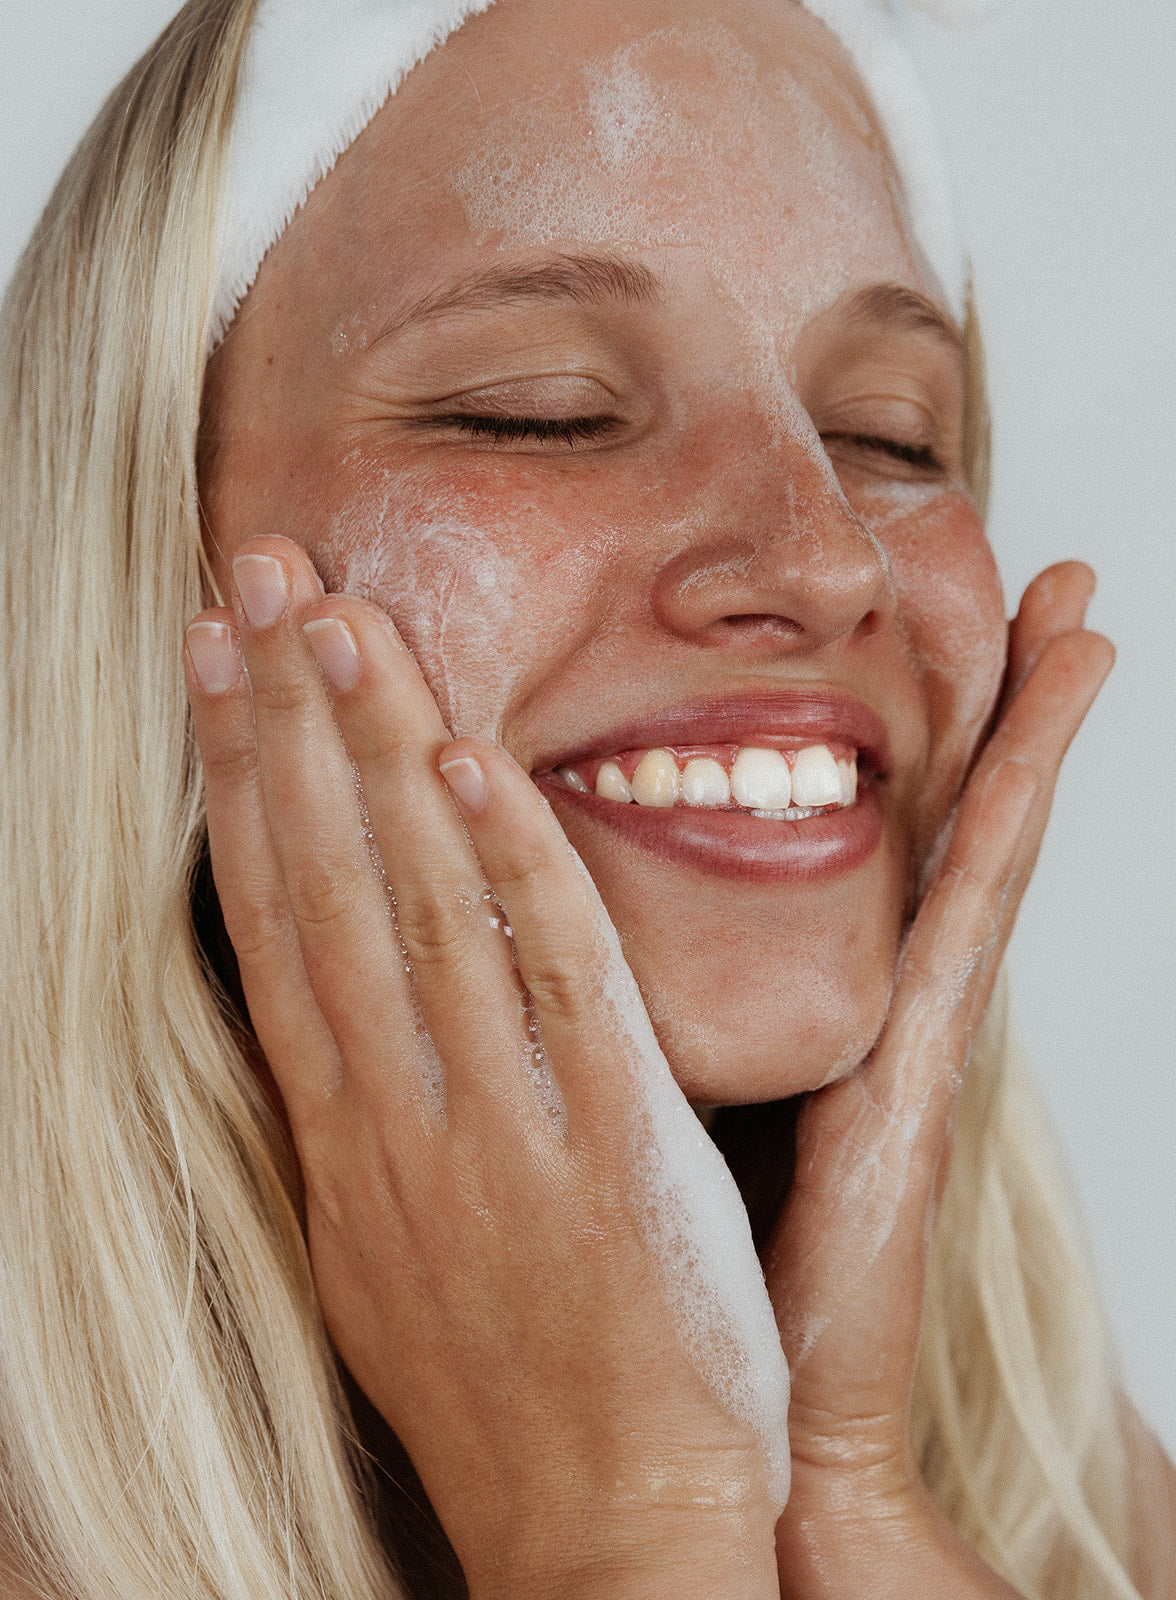 blonde girl with acne free no pimples putting kindred skincare deep sea gel cleanser on her face washing away bacteria